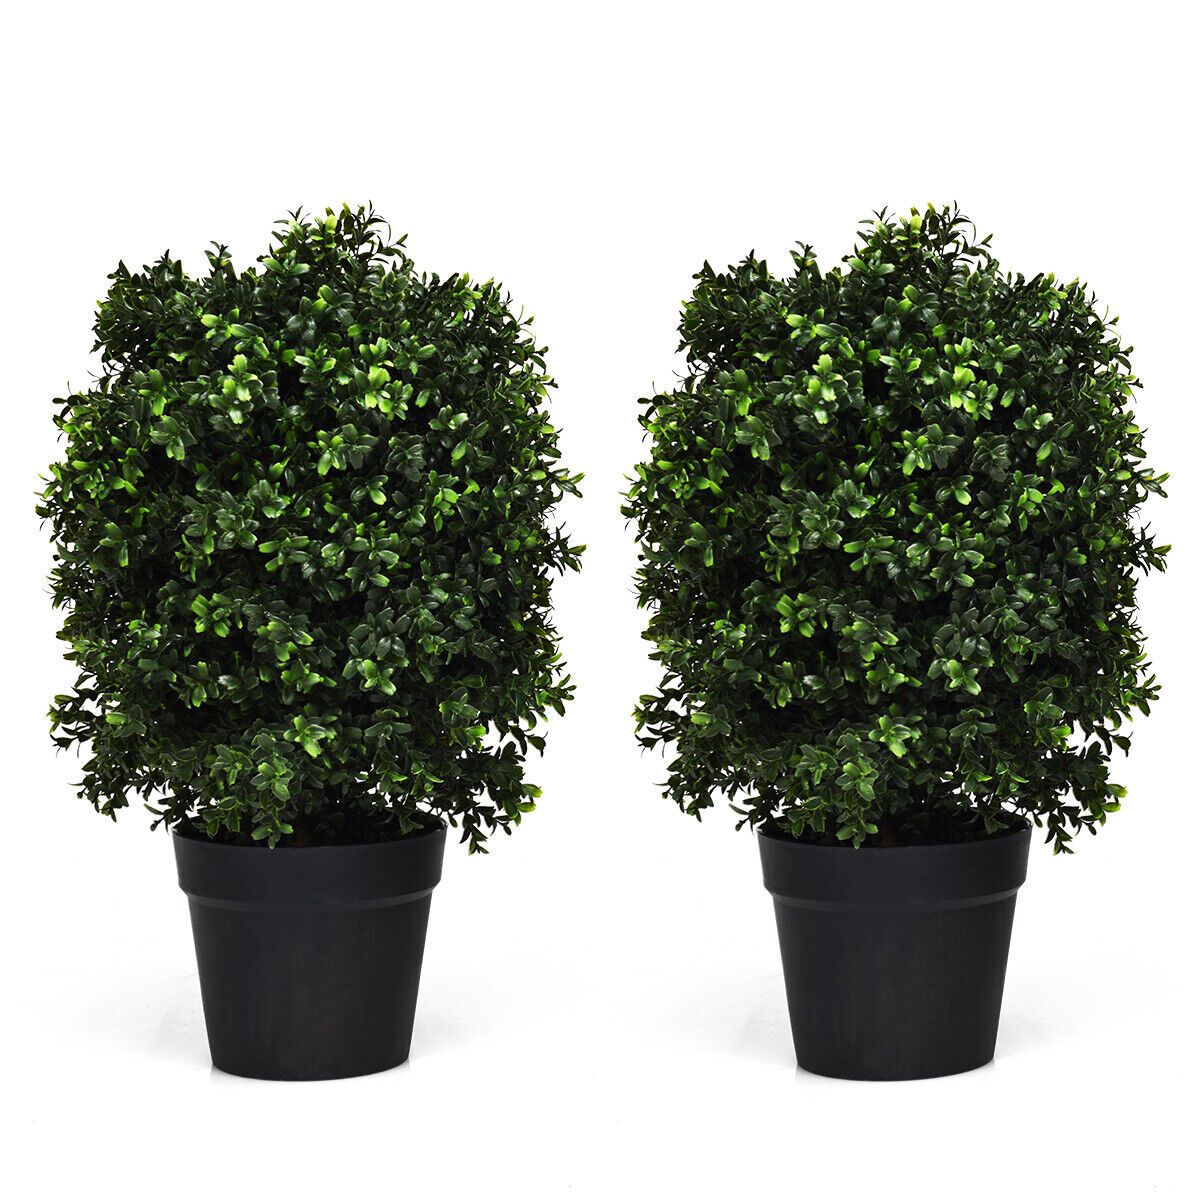 60cm Artificial Boxwood Topiary Ball Tree with Built-in Cement Pot